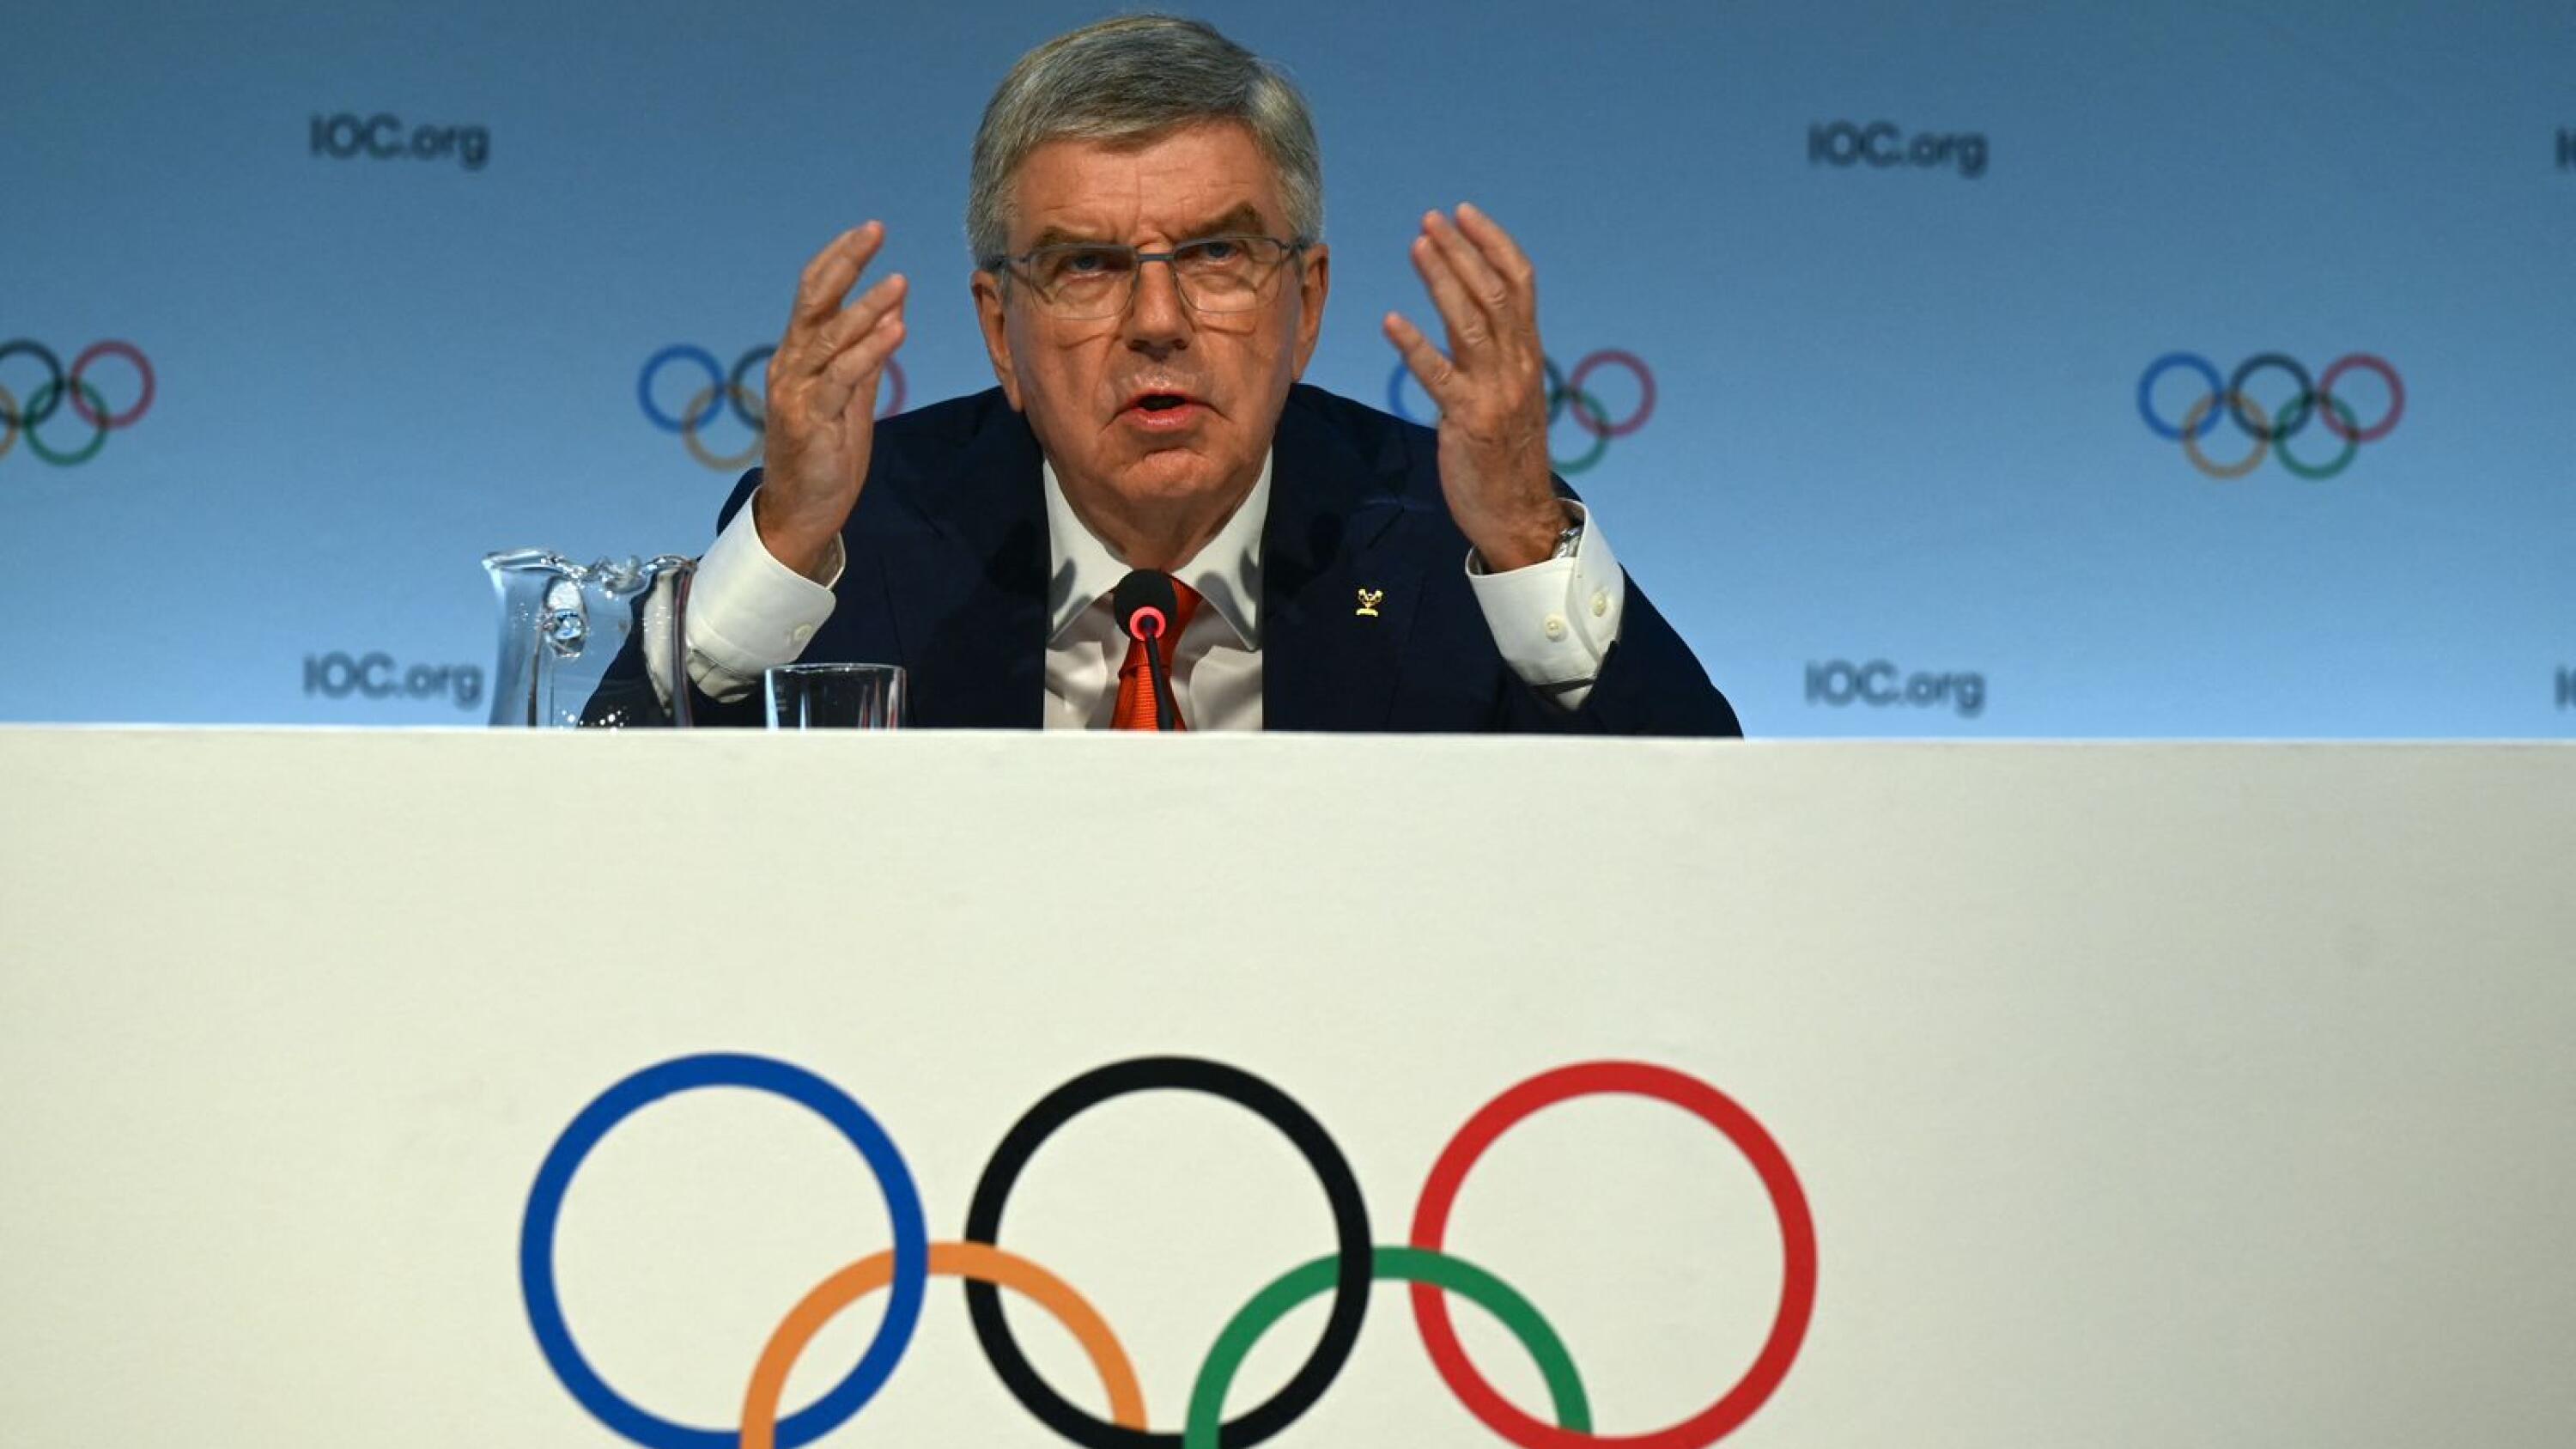 International Olympic Committee (IOC) President Thomas Bach speaks during a press conference ahead of the upcoming 141st IOC session in Mumbai